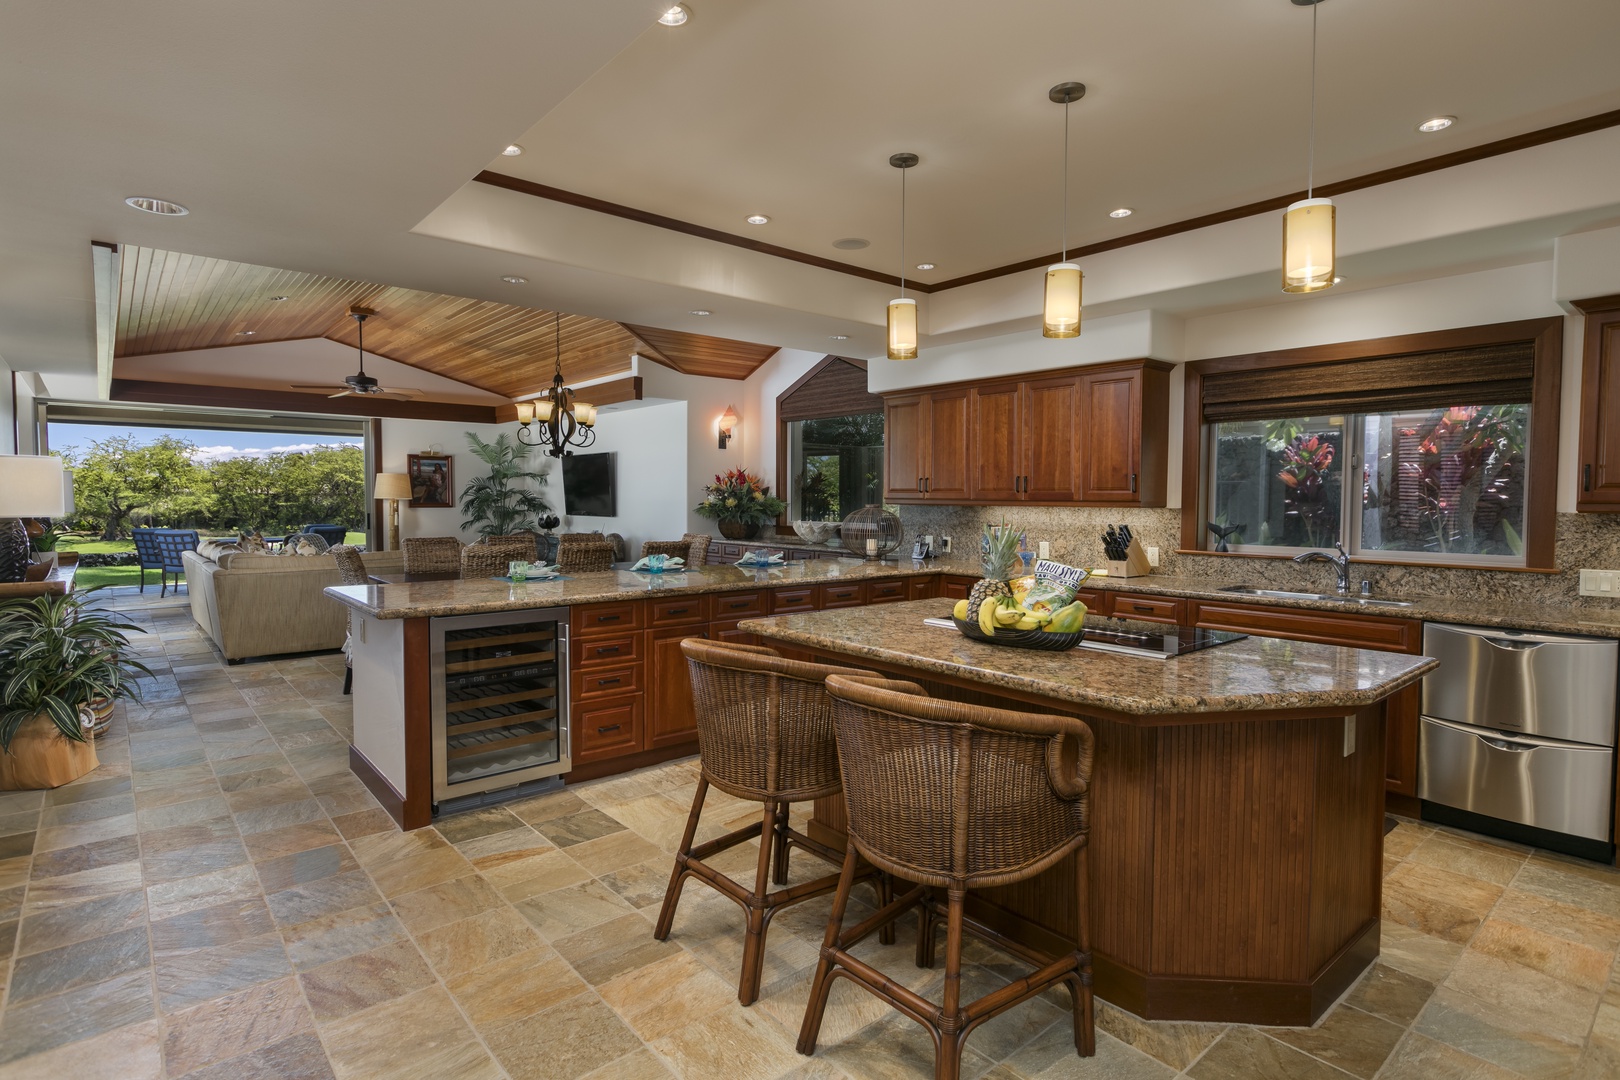 Kamuela Vacation Rentals, Villages at Mauna Lani Resort Unit # 728 - Gourmet Kitchen with everything you need!